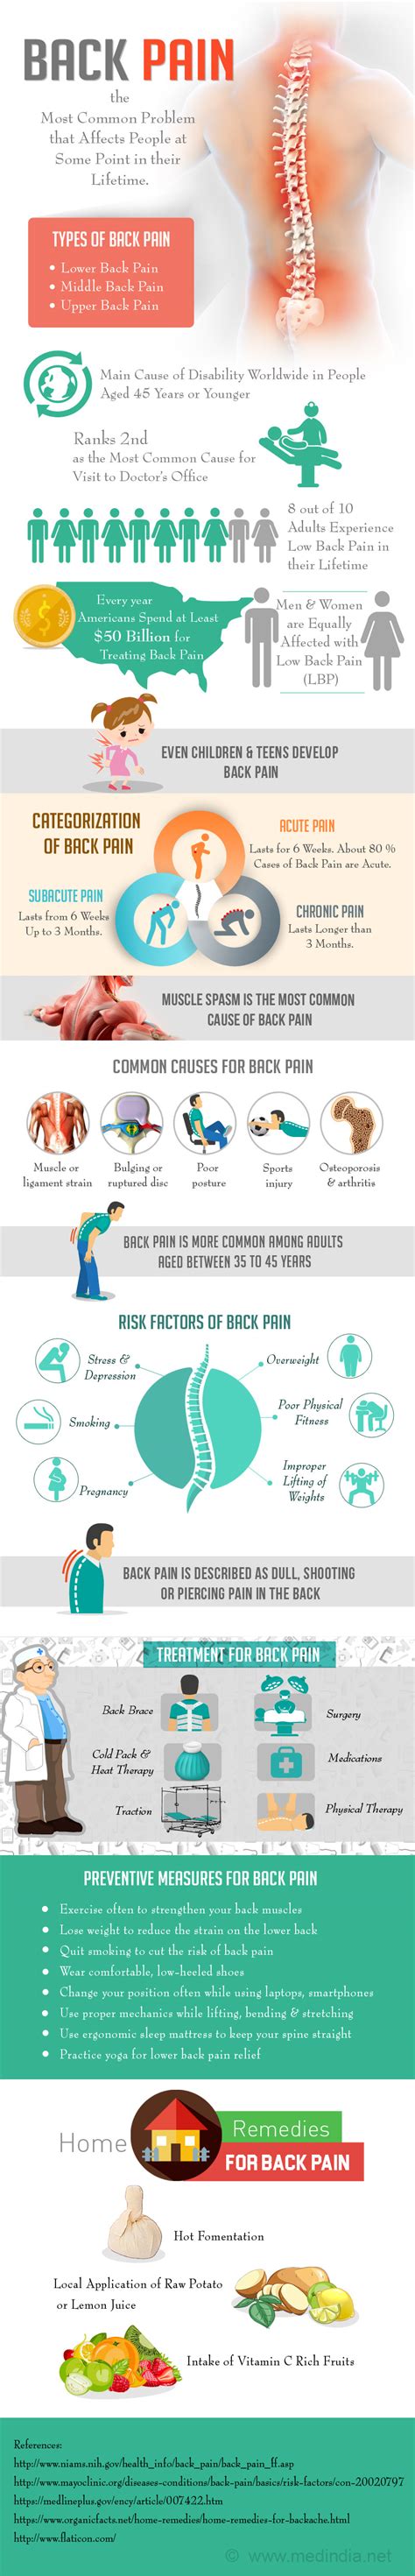 Infographic On Back Pain